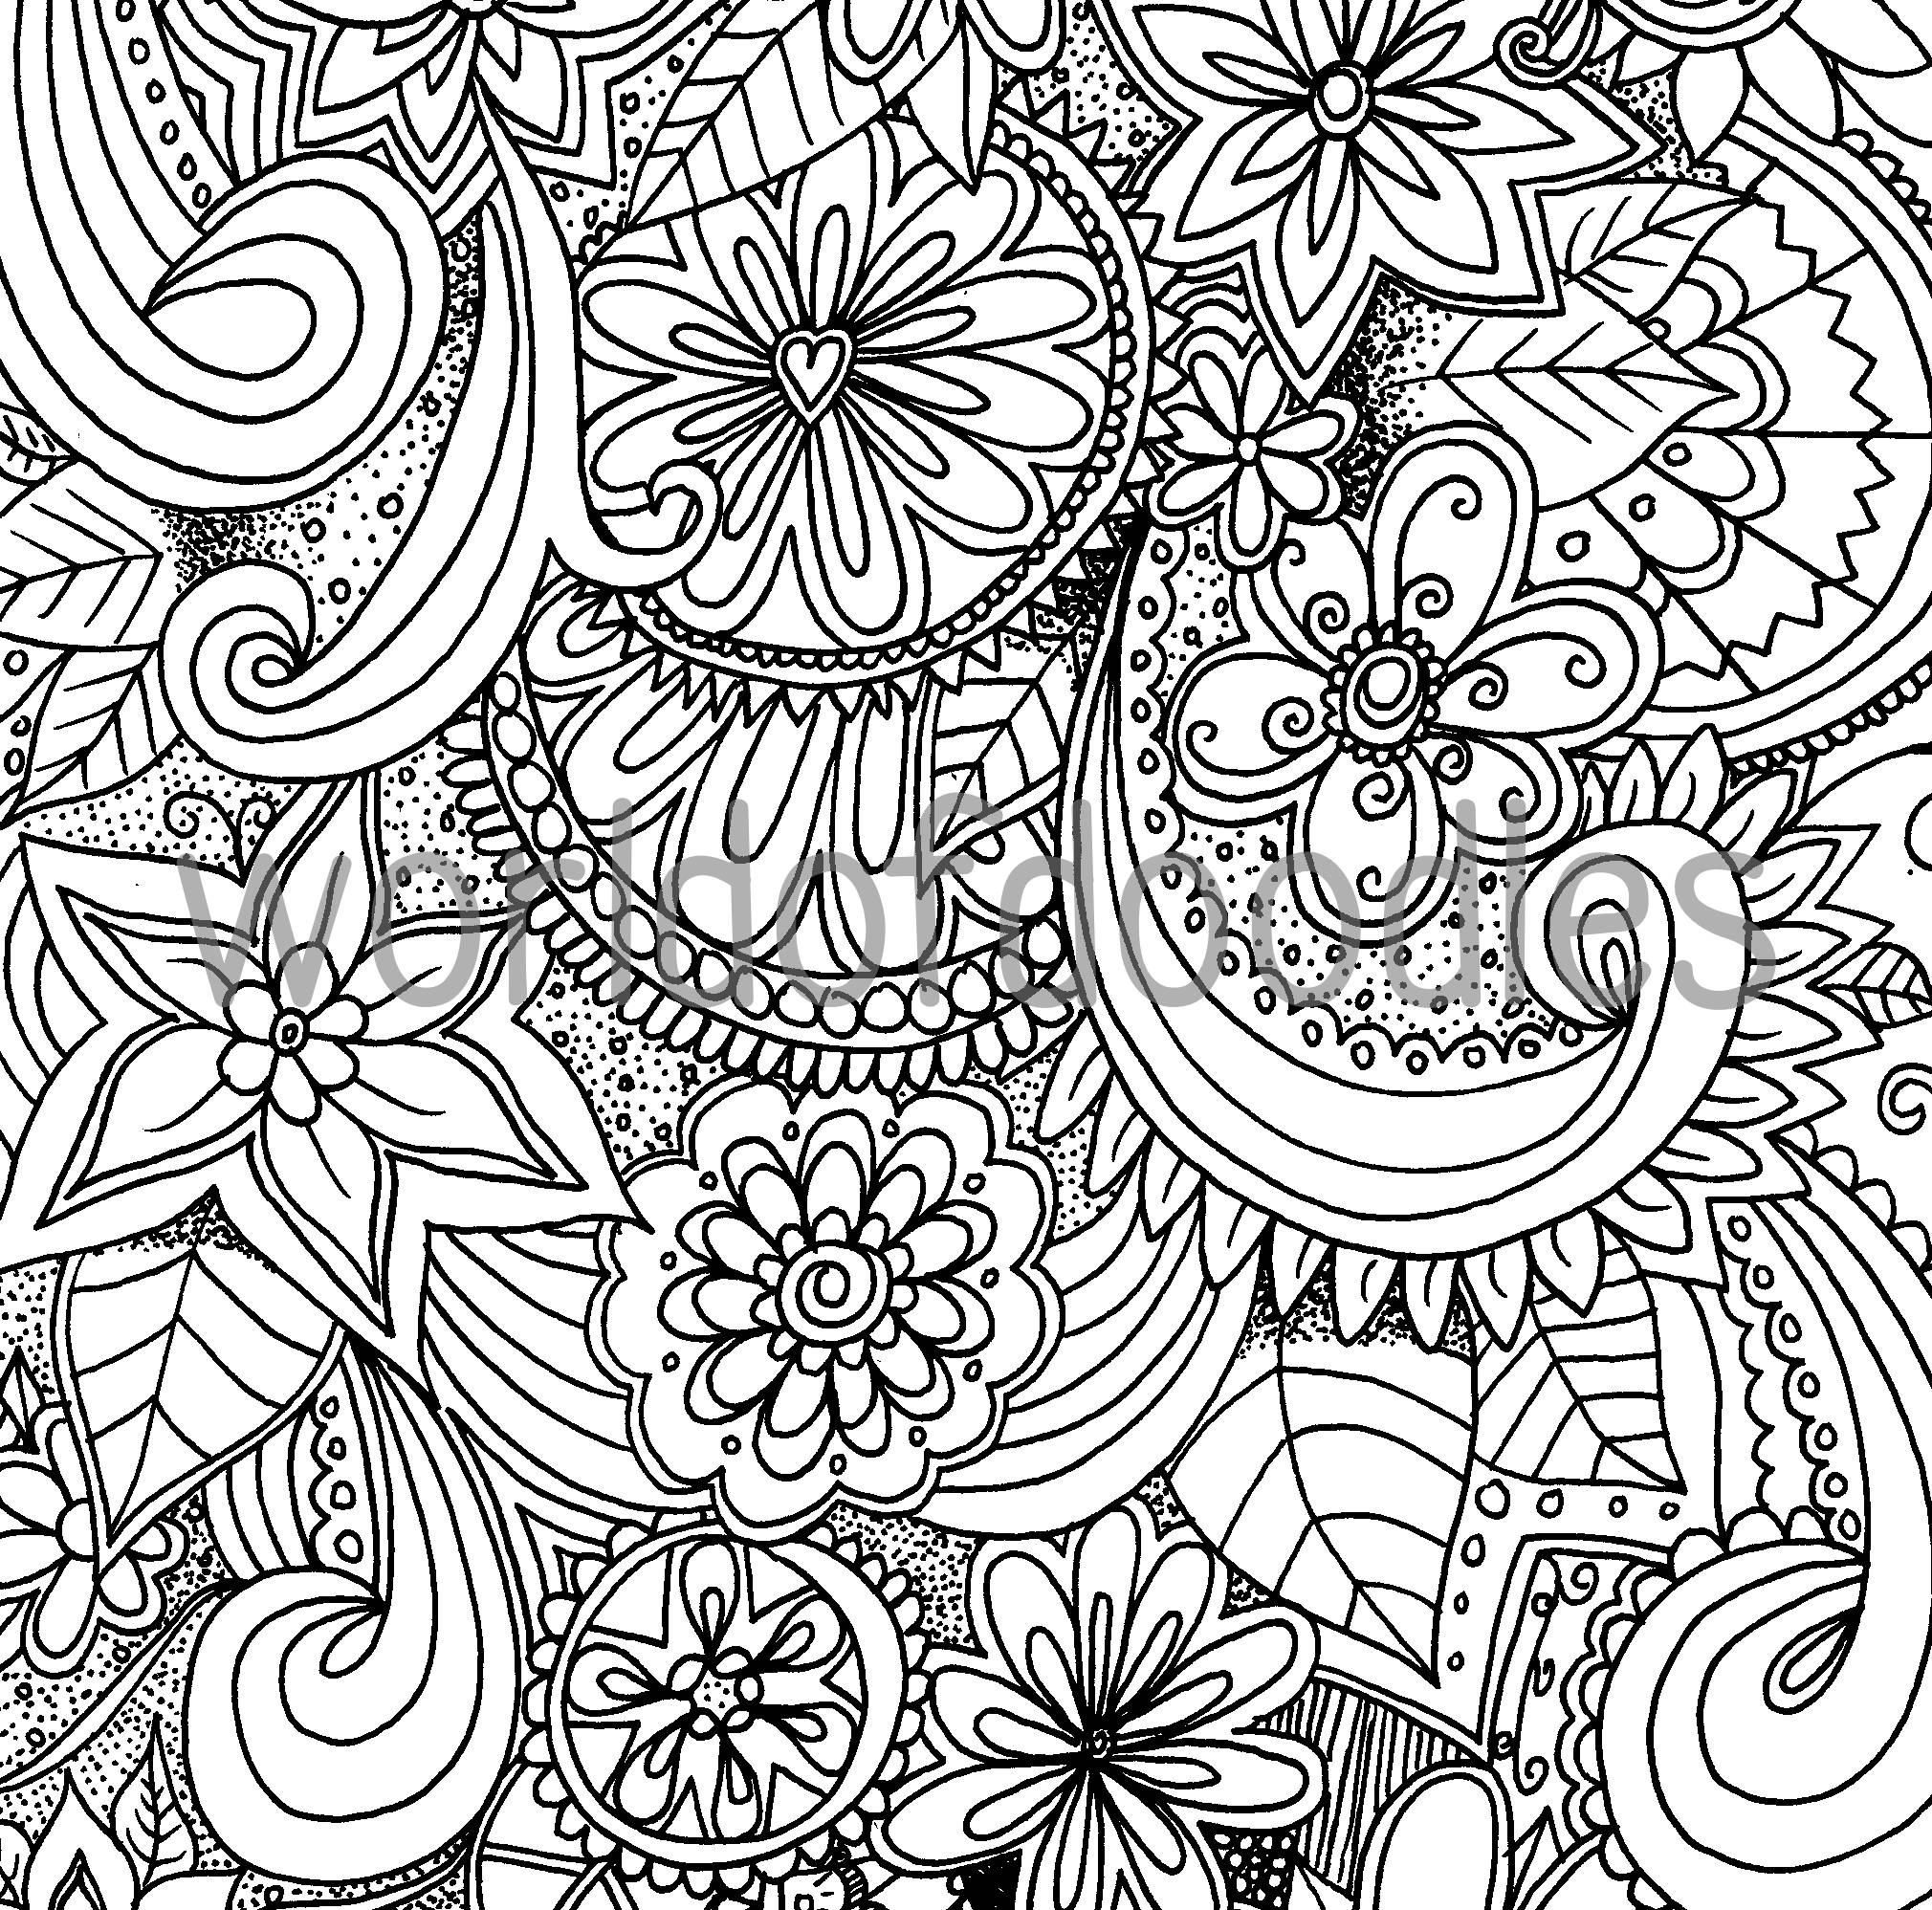 Flower Garden 2 A4 Colouring Page Printable PDF Download